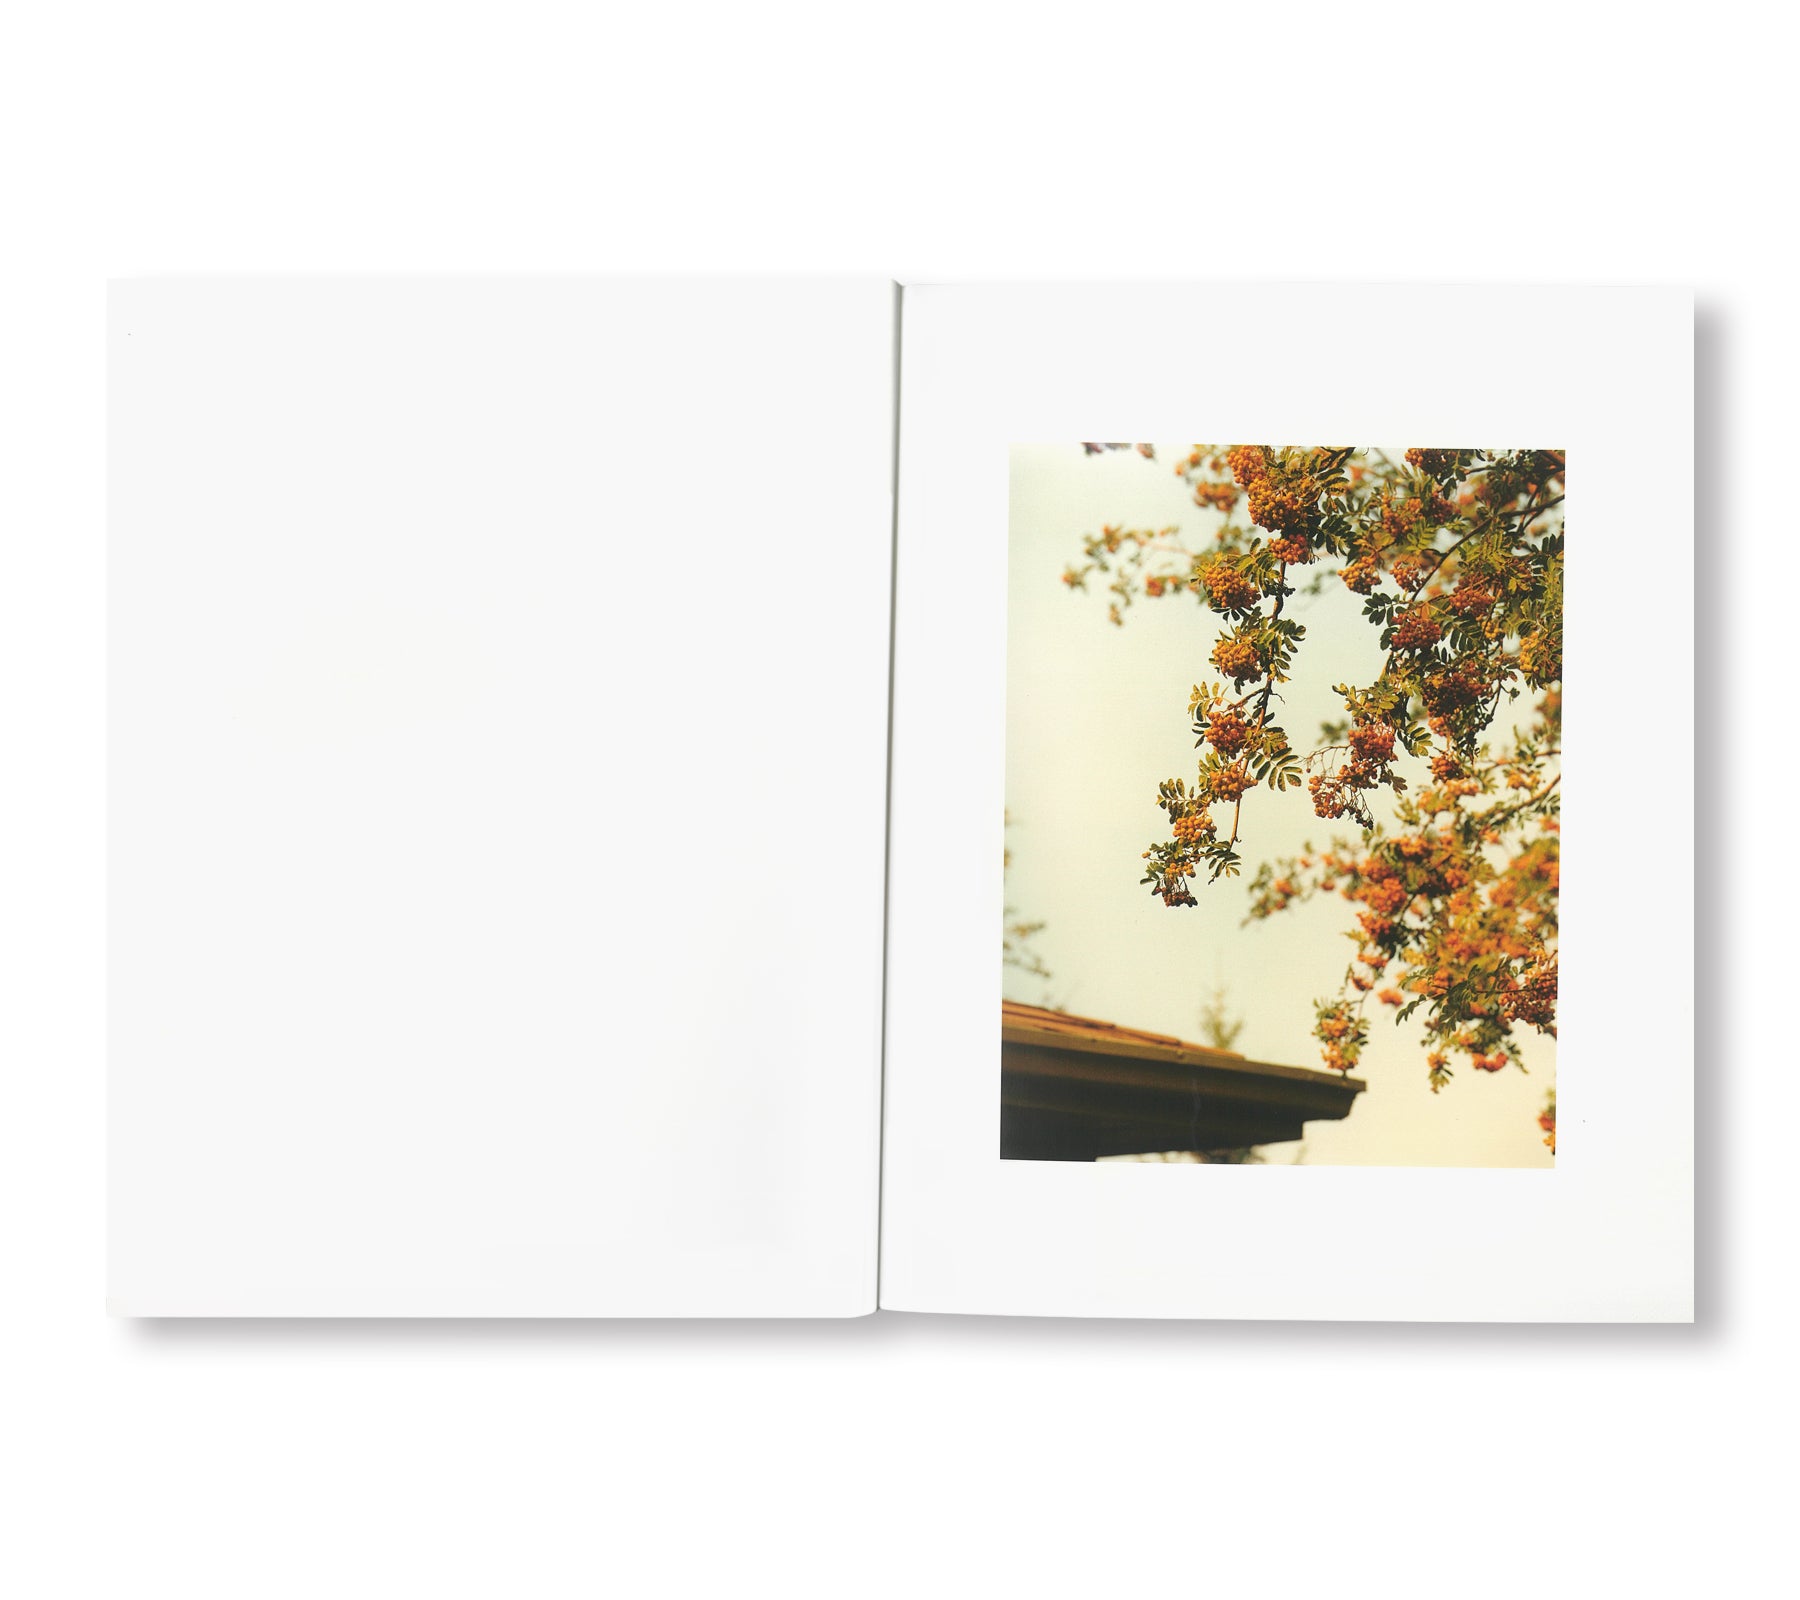 SPARE BEDROOM by Roe Ethridge [SIGNED]